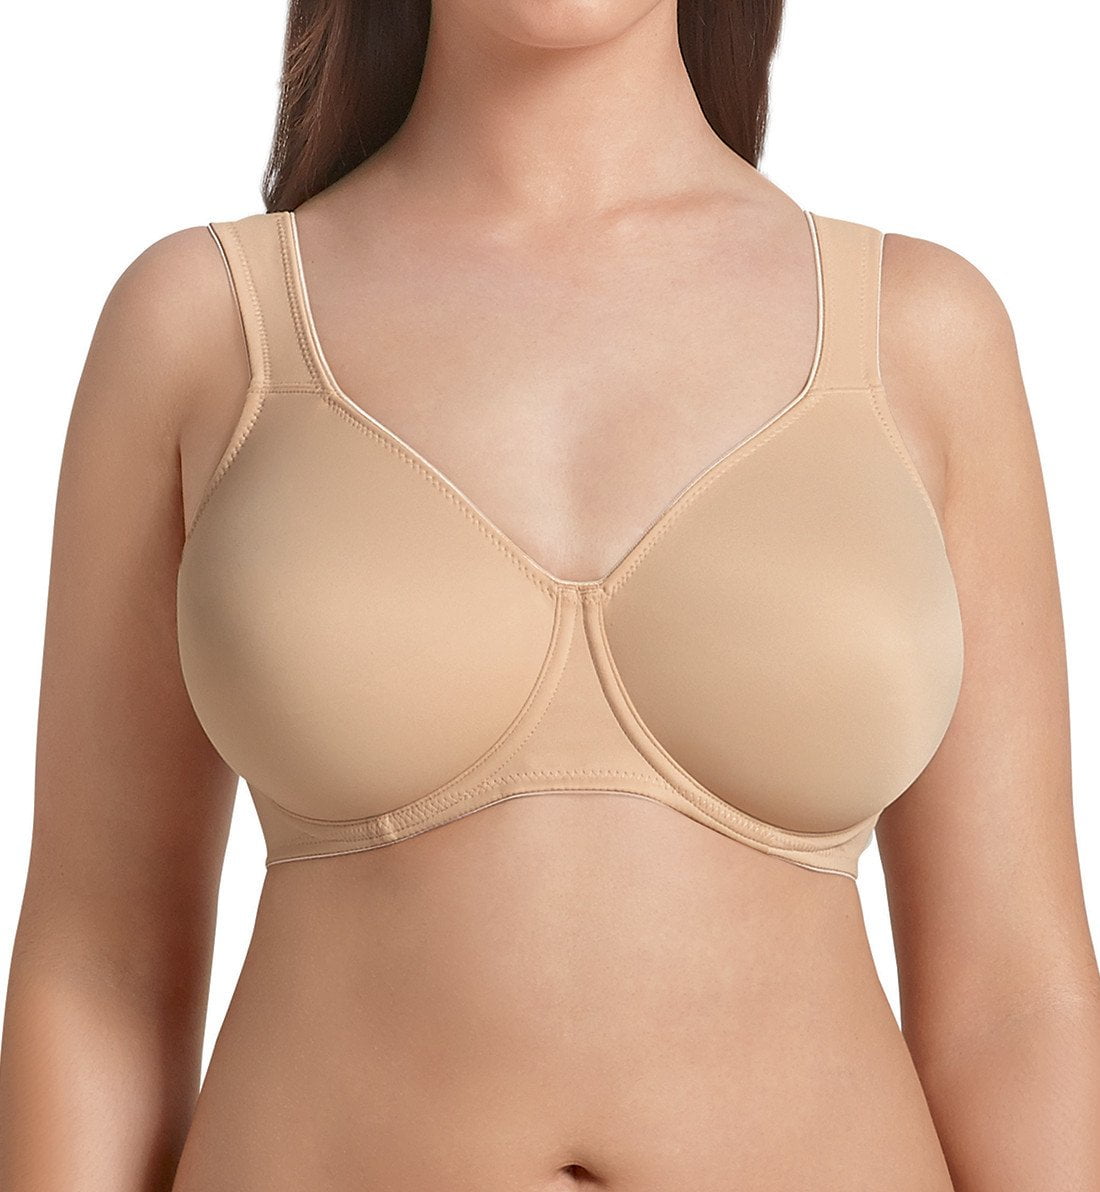 Skin Rosa Faia By Anita Twin Bra T Shirt Full Cup 5490 Underwired Moulded